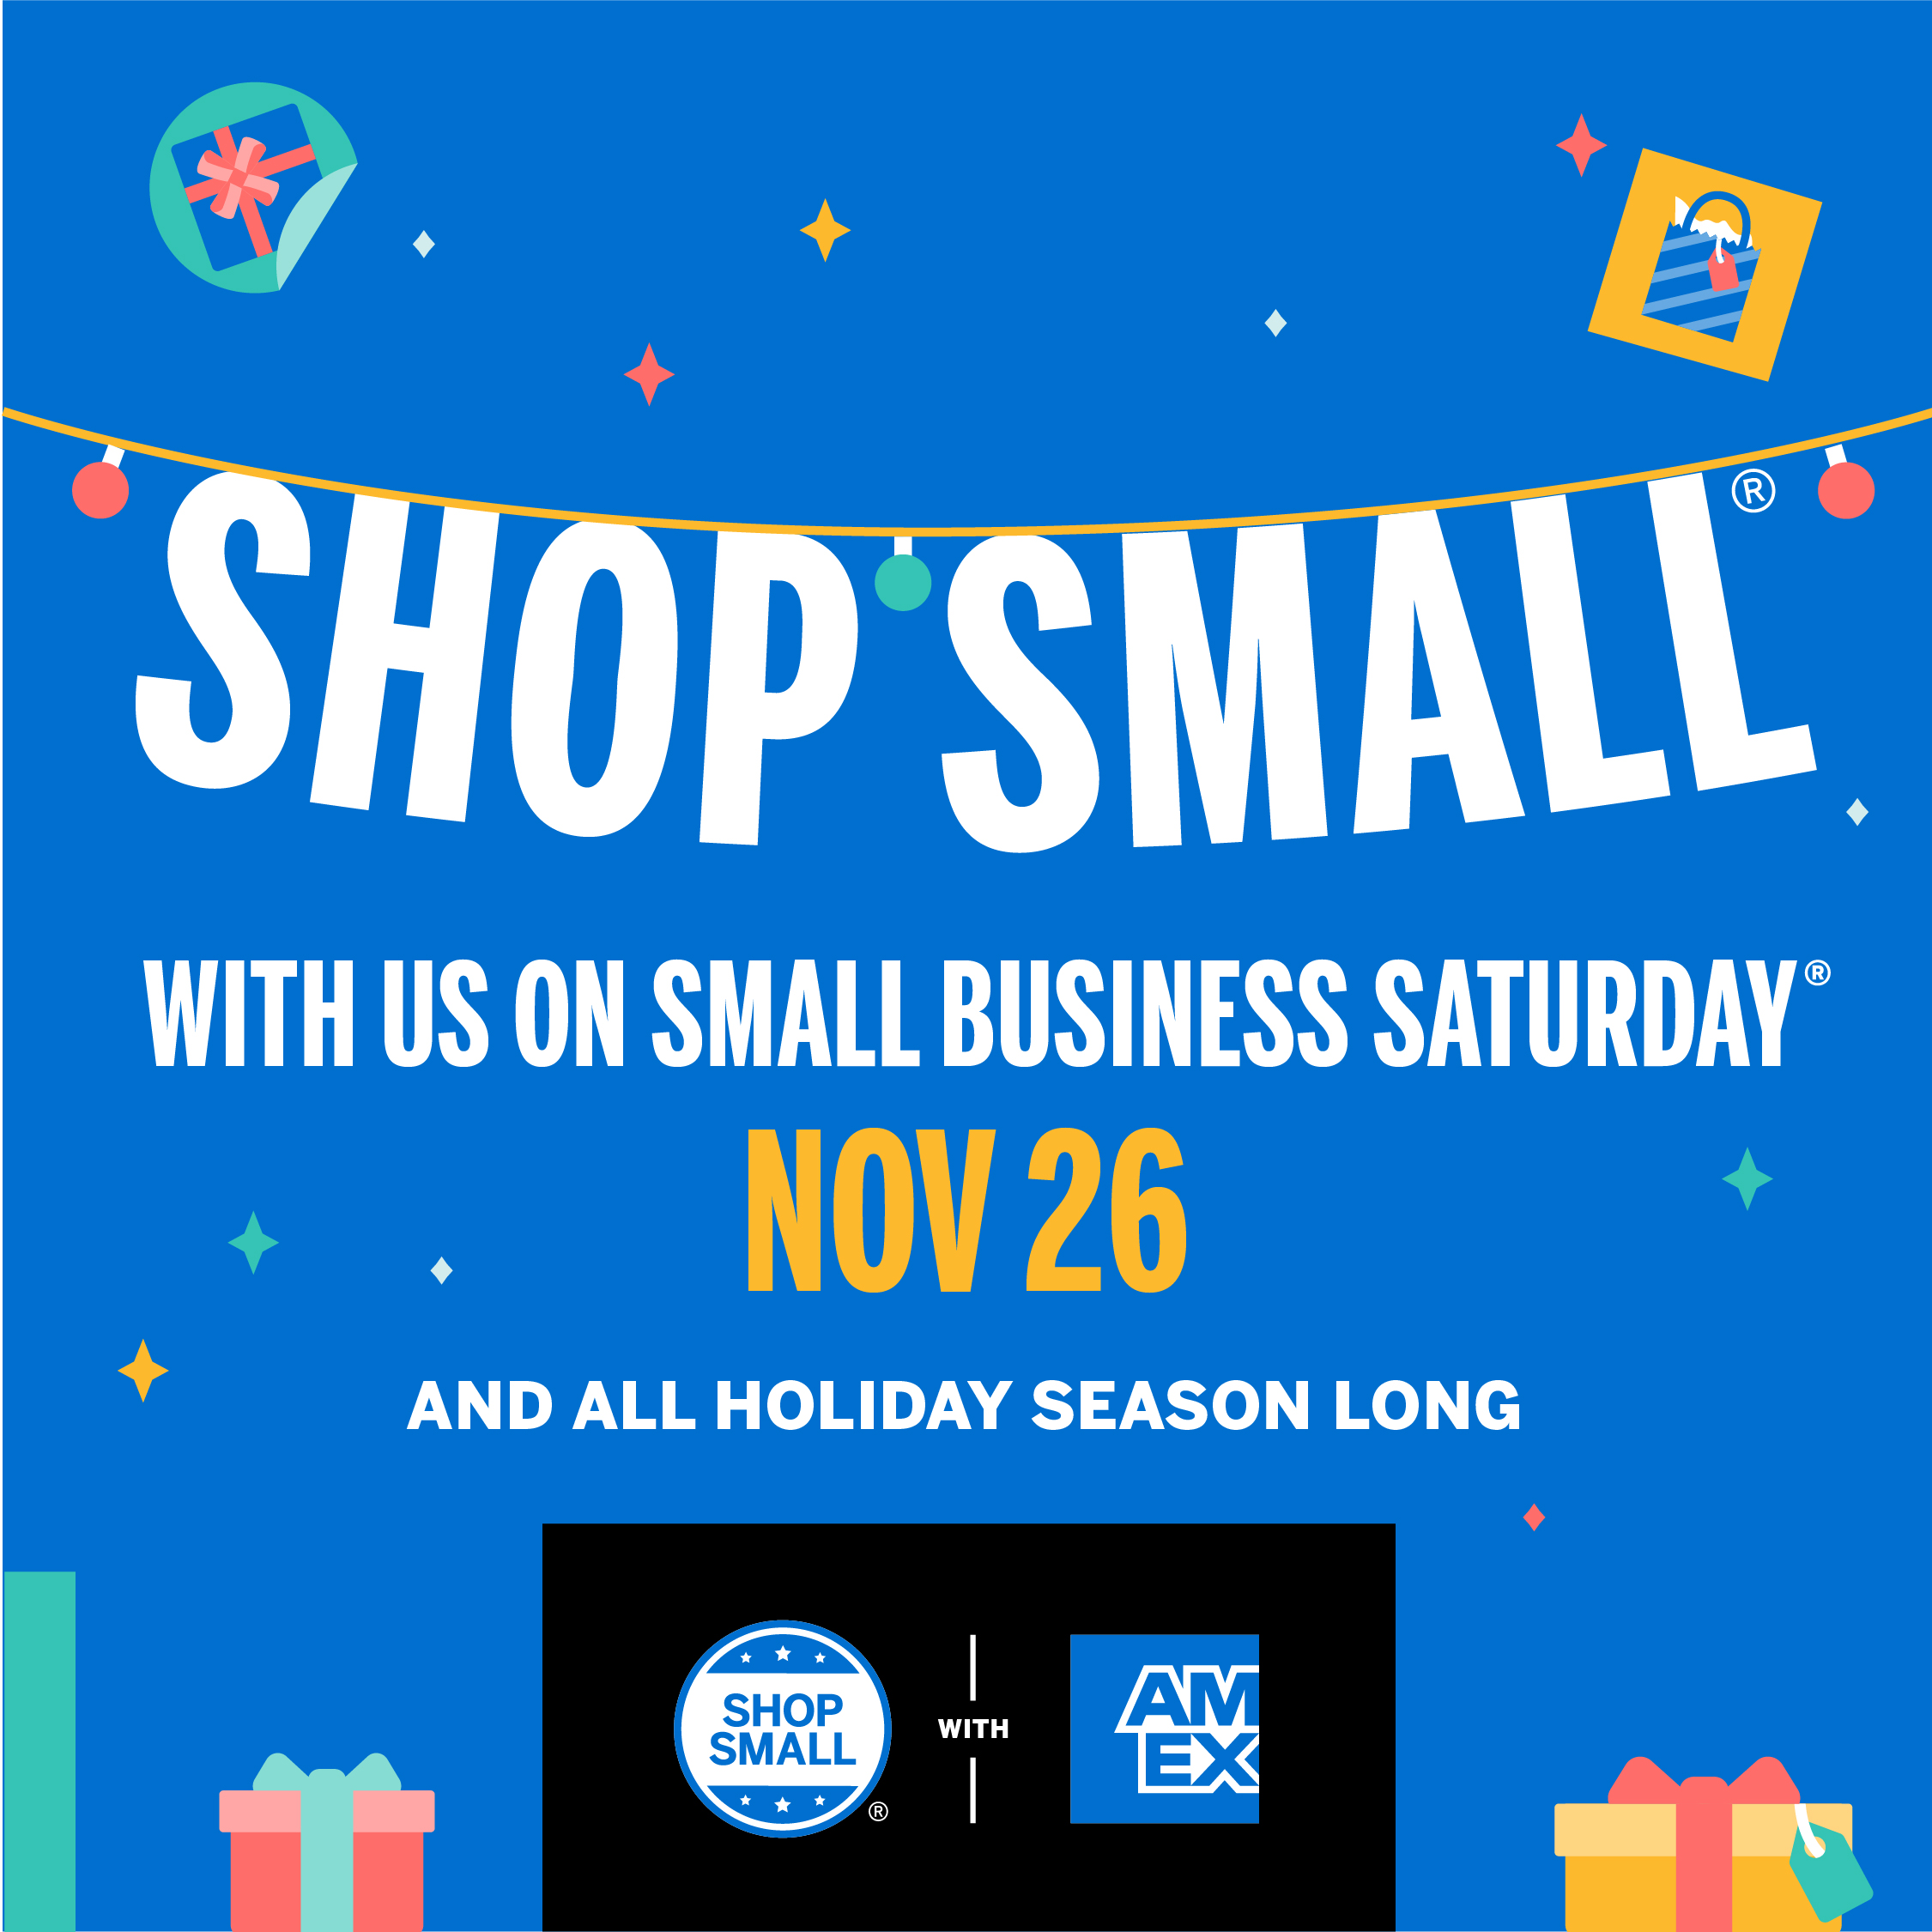 Free Materials for Small Business Saturday